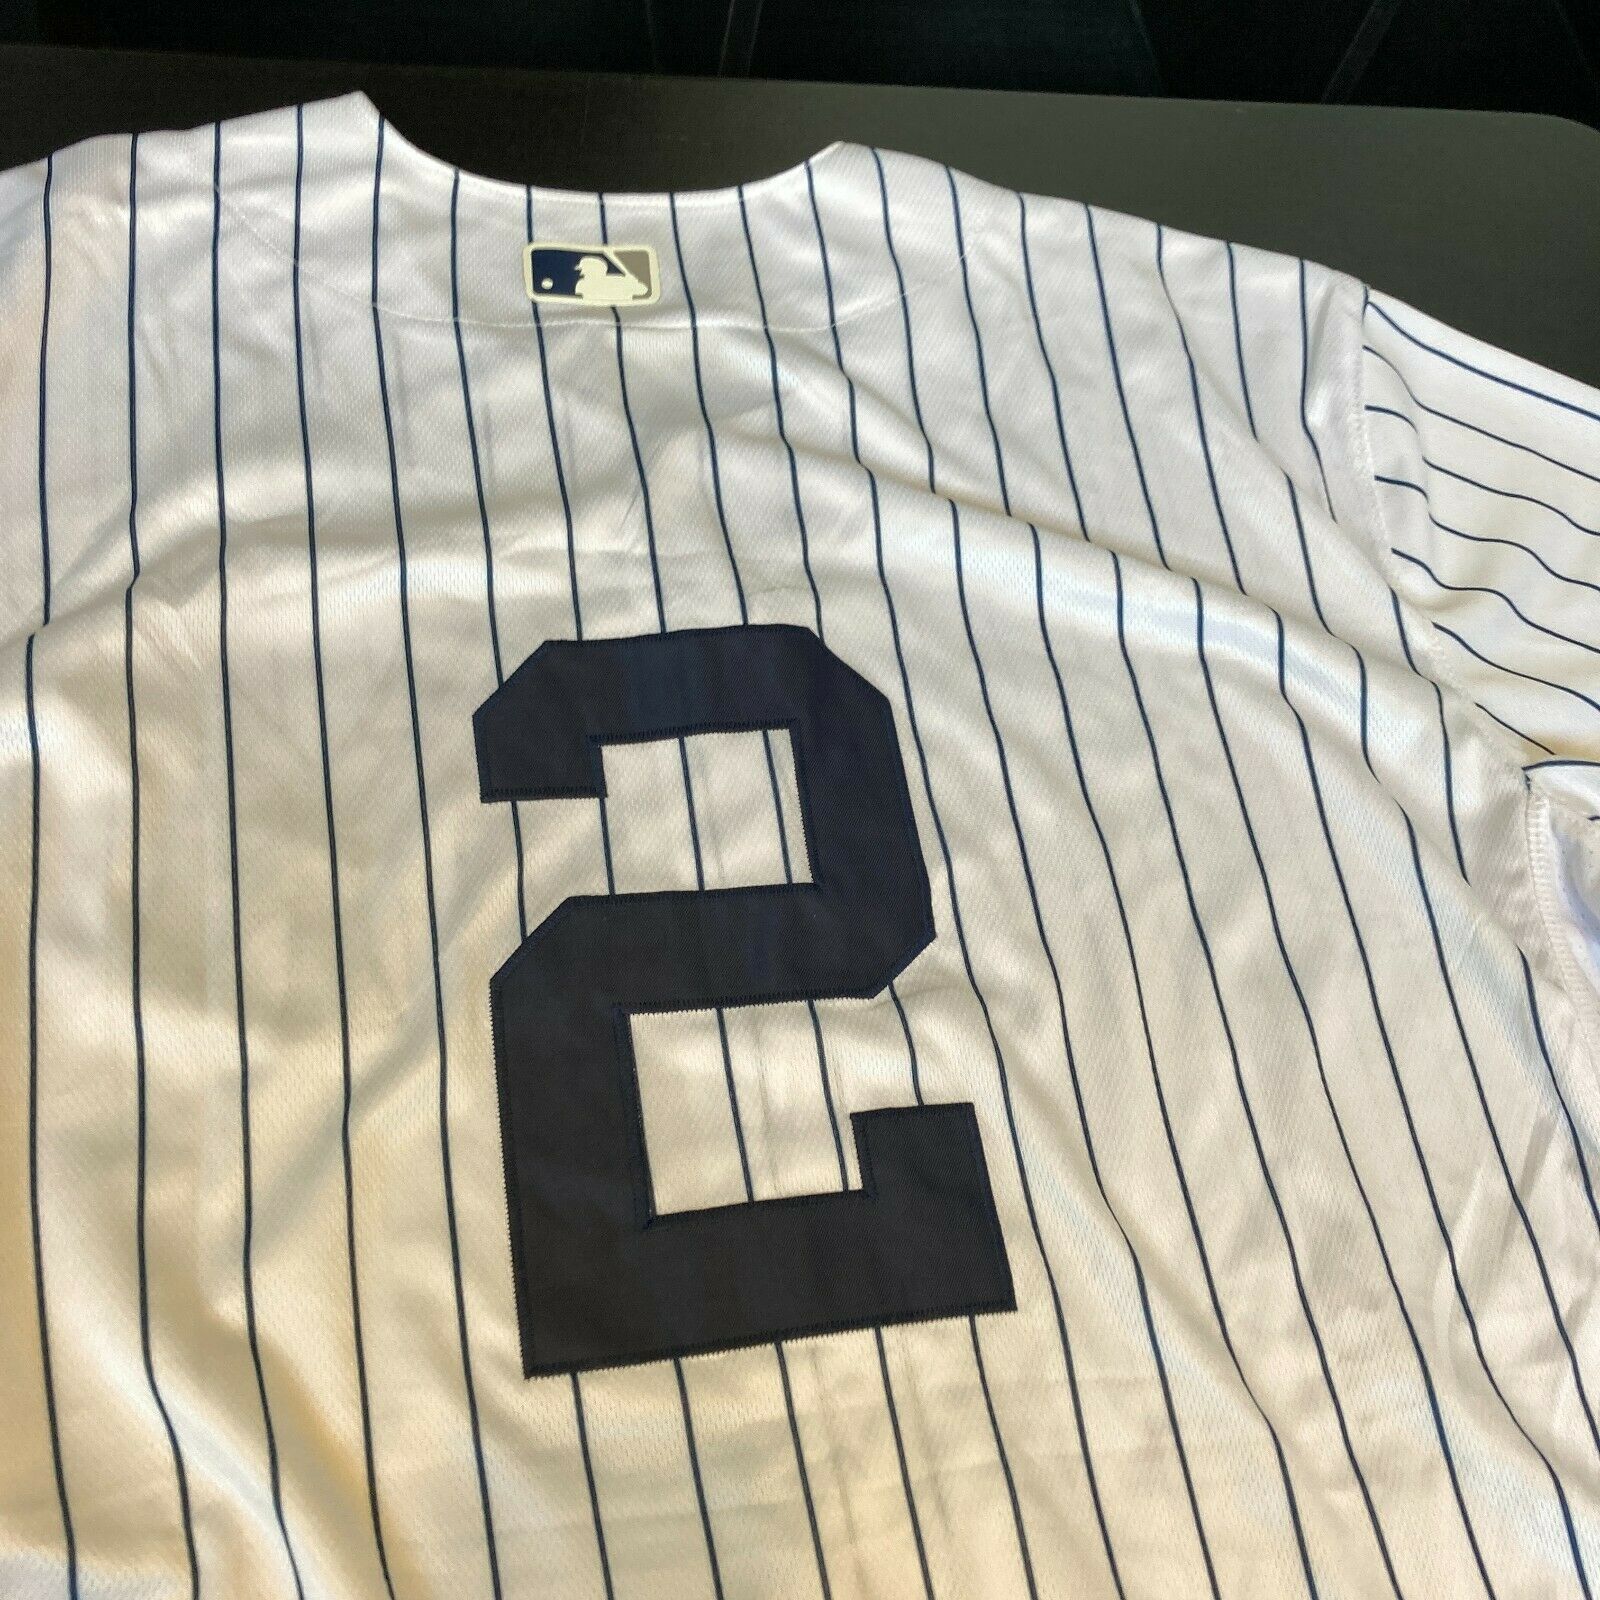 Derek Jeter Nike Authentic Collection New York Yankees Jersey Size